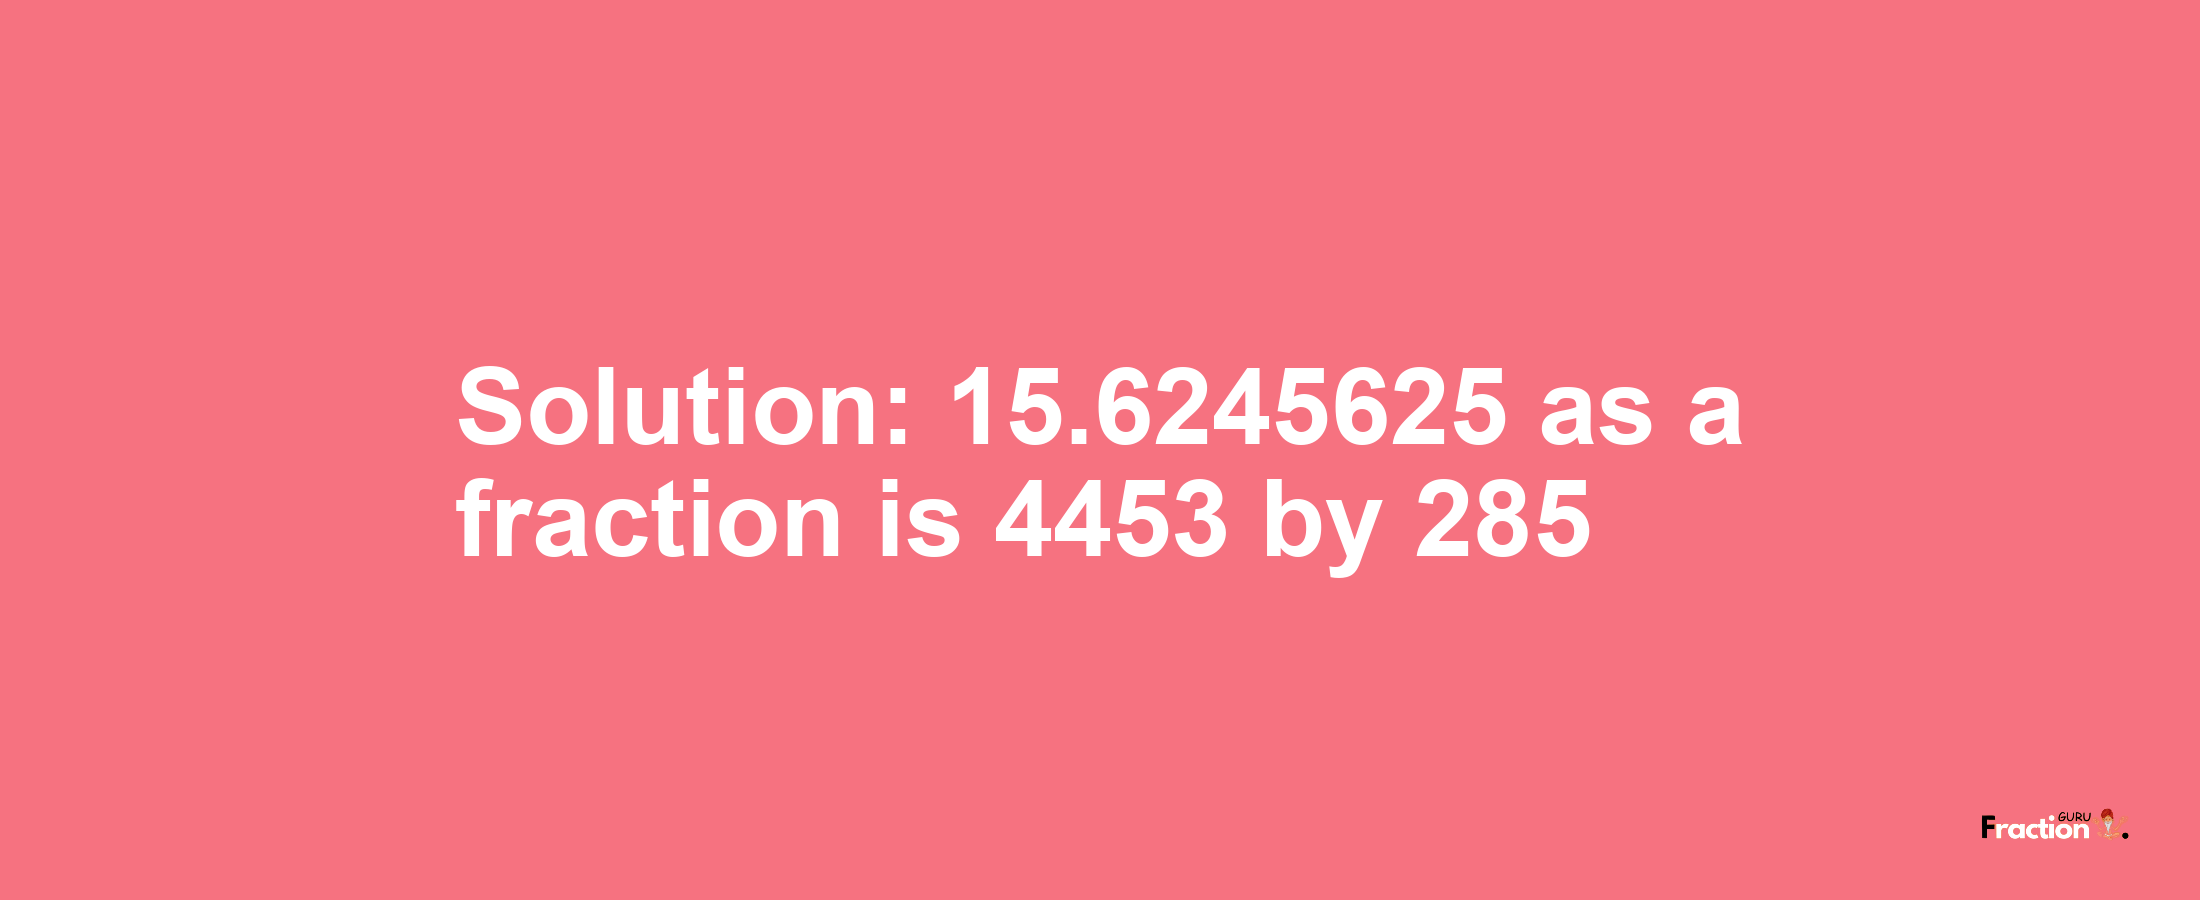 Solution:15.6245625 as a fraction is 4453/285